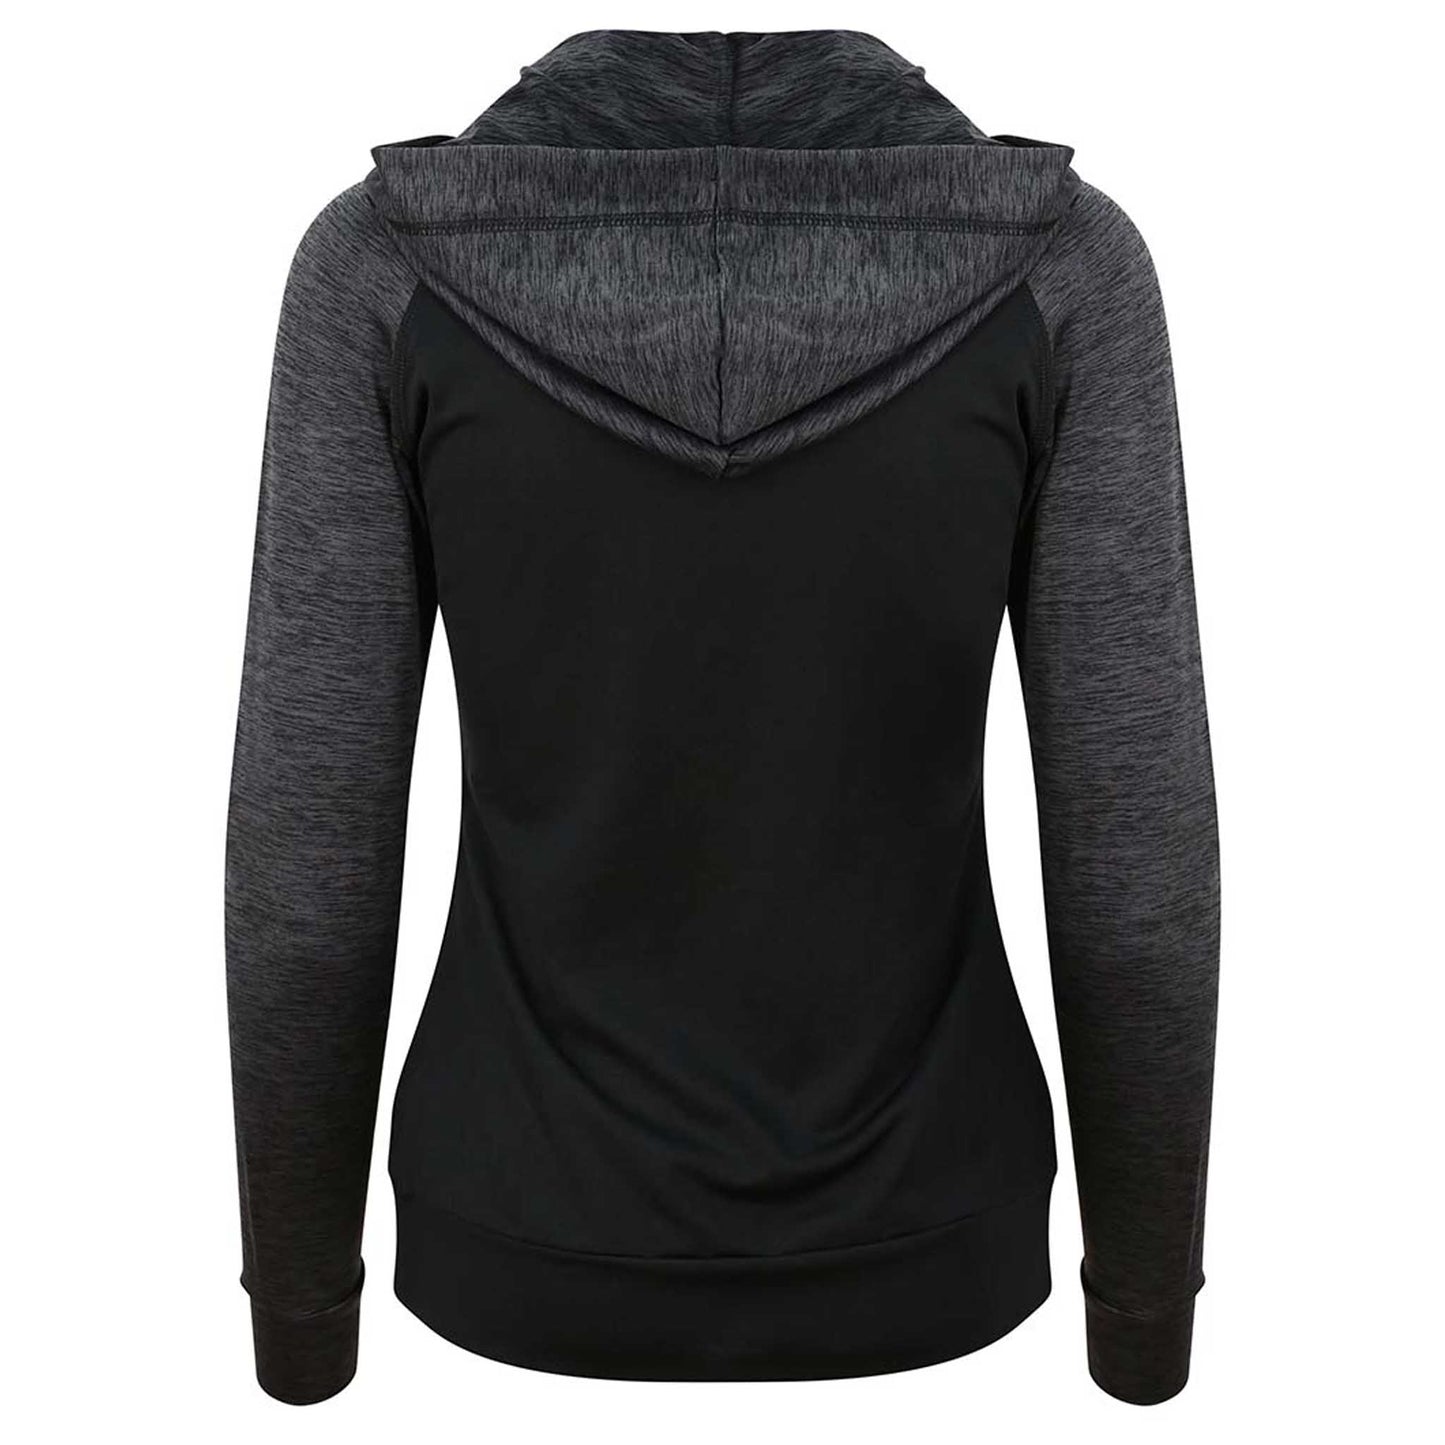 LILY - Ladies Contrast, Hooded, Full Zipped Jacket. - Charcoal